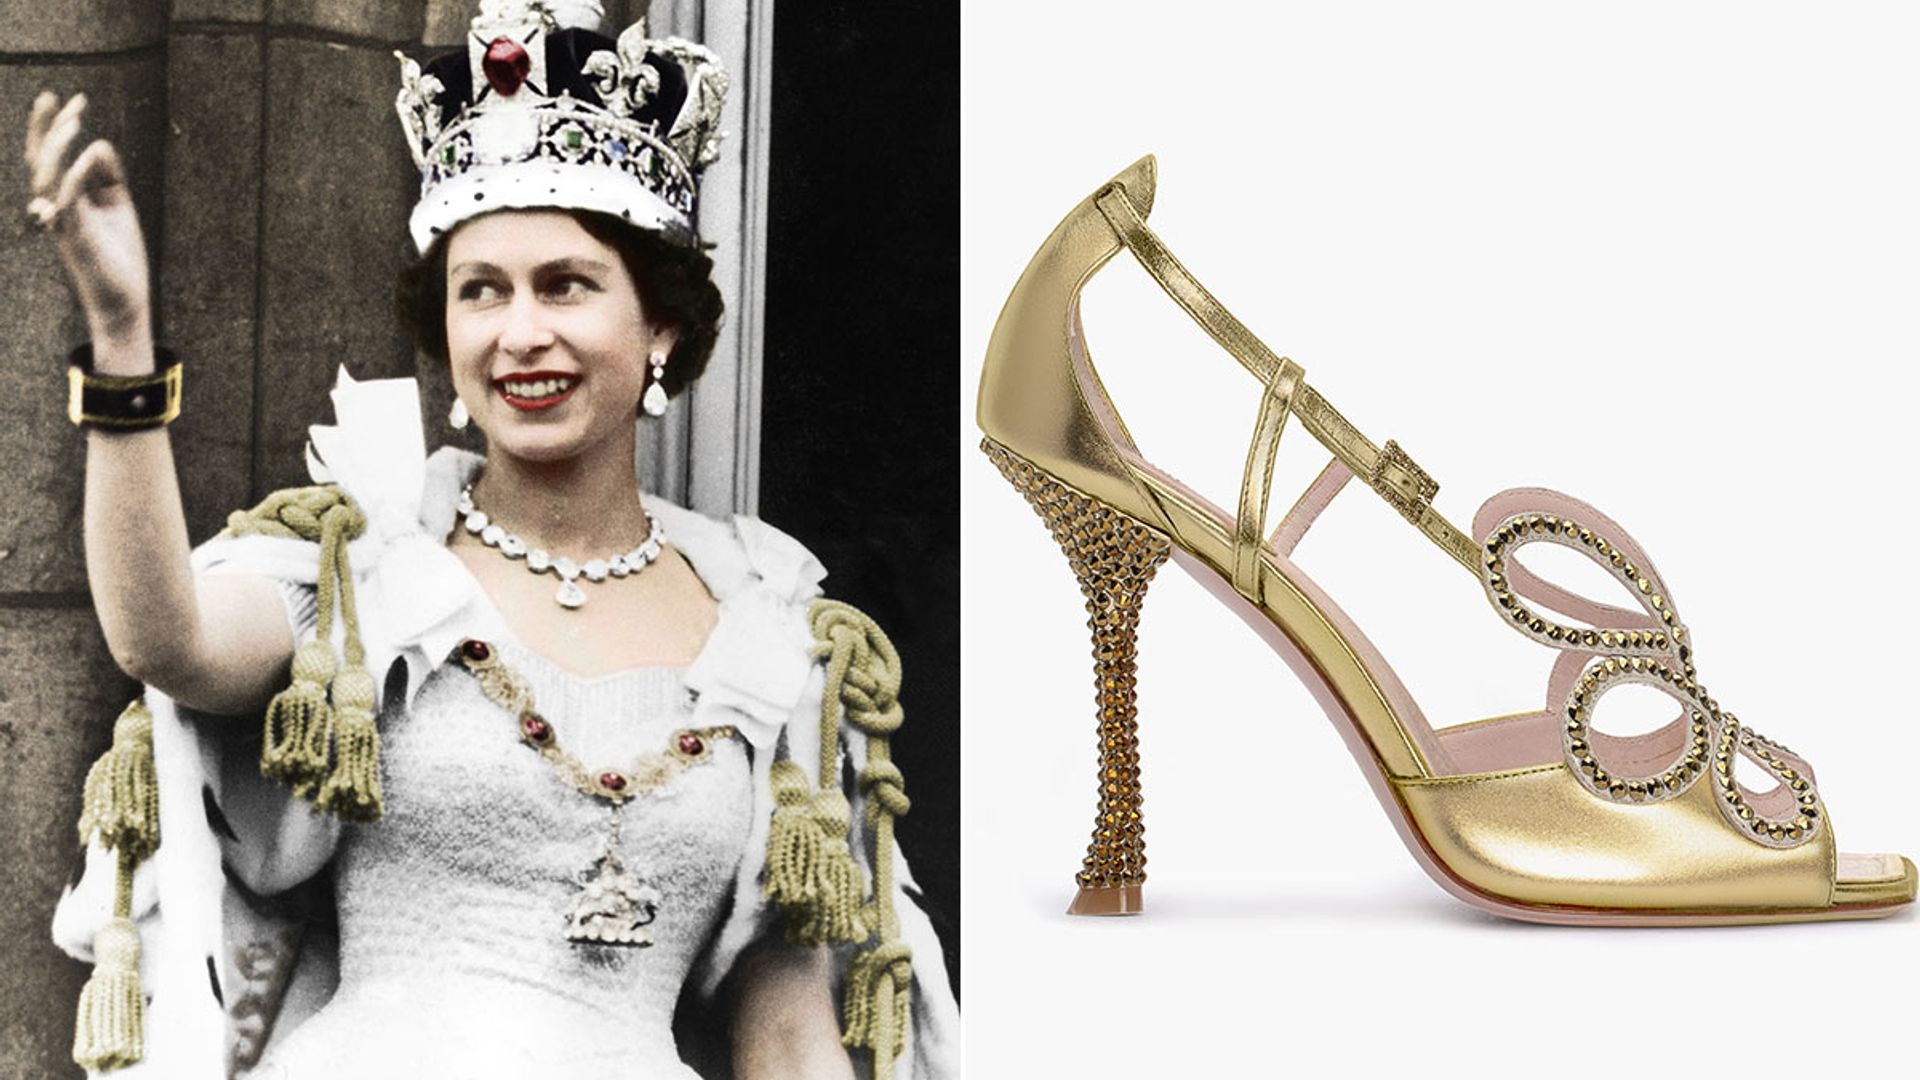 comprehensive slogan global The Queen's iconic coronation shoes are being launched to buy | HELLO!